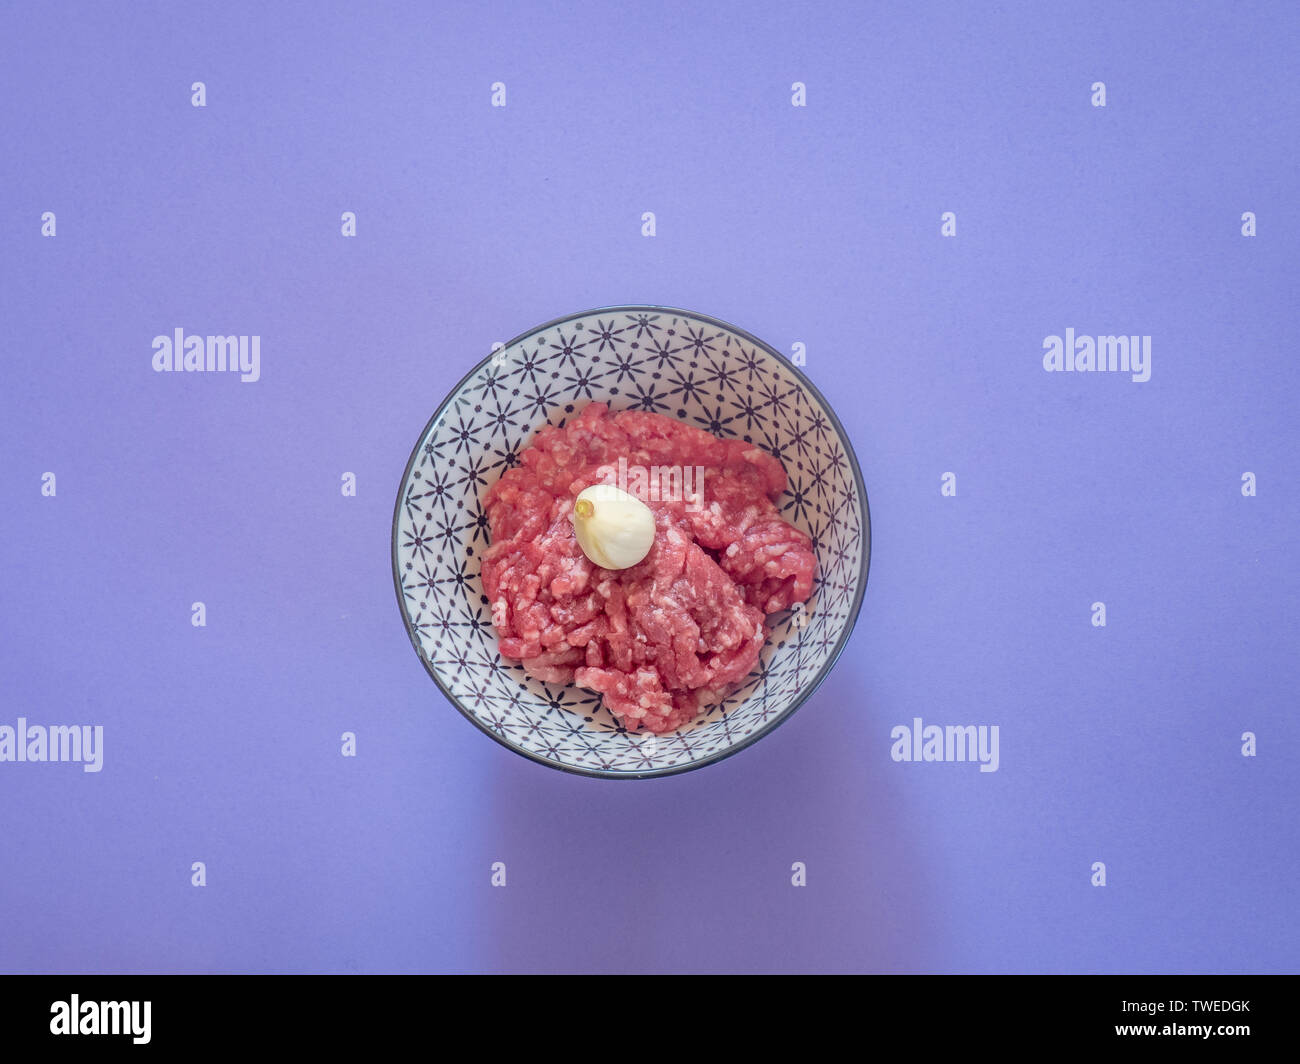 Minced beef meat in a bowl on purple background Stock Photo